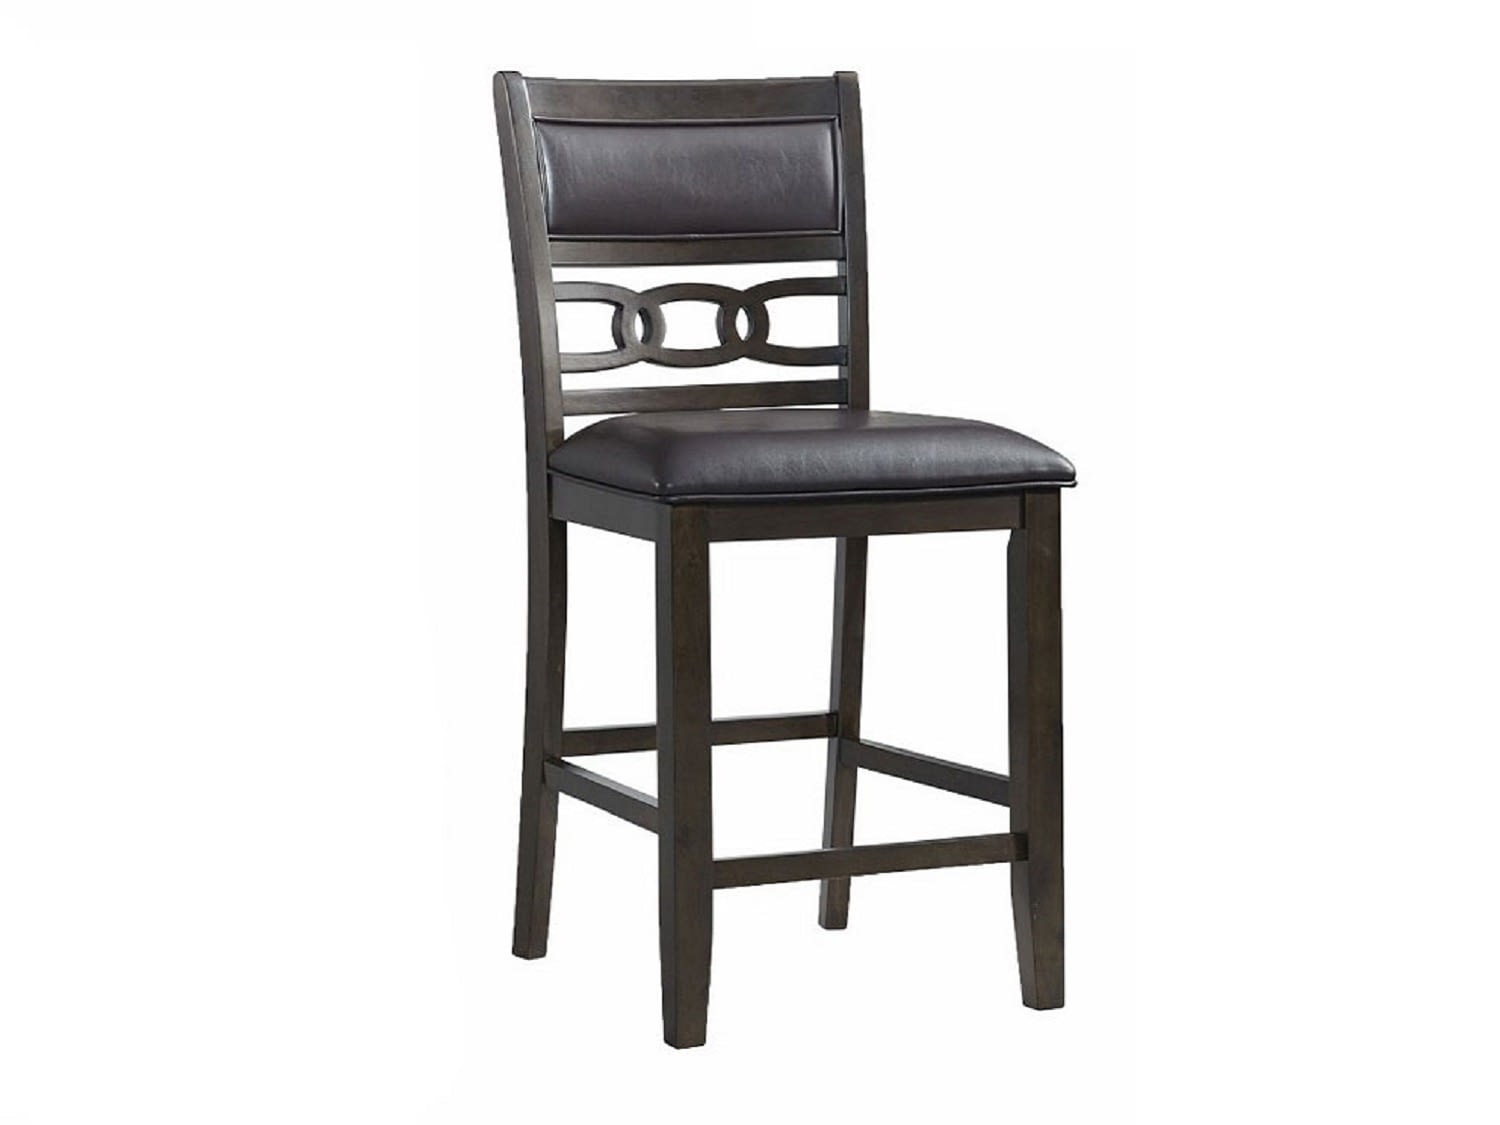 HAWK Counter Height Dining Chair